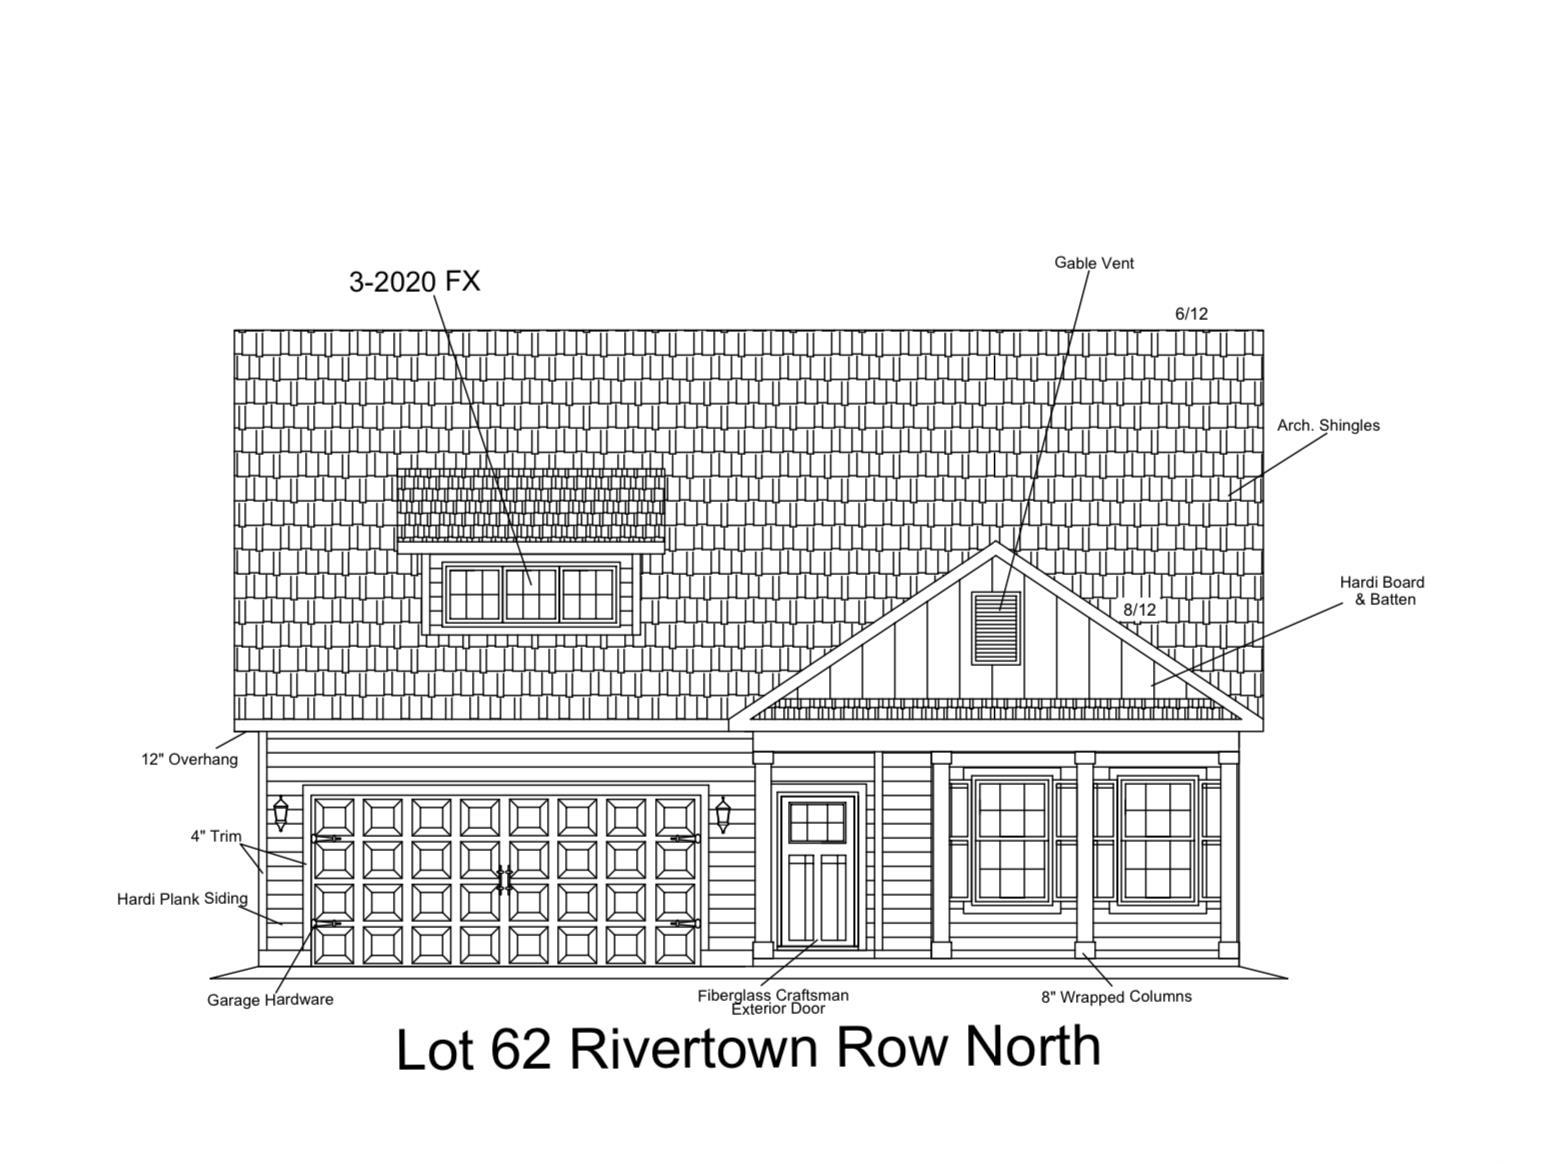 welcome to rivertown row north, the most anticipated new development in the heart of conway. enjoy the comfort of natural gas heat, cooking & tankless hot water in this single level lakefront 1806 sq ft pinckney model. this 3 bedroom, 2 bath floor plan has a large rear master suite, vaulted great room ceilings, granite kitchen counter tops, and a kitchen island w/ seating. the waterproof laminate plank flooring extends throughout the kitchen, baths  and living areas.  there is also a 2 car painted and trimmed garage, drop down attic access, laundry room, pantry,  covered front porch, and a covered rear porch with an additional concrete patio that doubles your outdoor entertainment space. all homes in rivertown row north feature wider than average lots, open floor plans, 9' ceilings, painted garage interiors, fully cased windows, gaf high performance architectural shingles, 12" roof overhangs, aristokraft birch shaker cabinets, rinnai tankless water heater, frigidaire stainless appliances, and many other upgraded architectural details. the neighborhood features sidewalks, street lighting and a community pool with pavilion. building lifestyles for over 35 years, we remain the premier homebuilder of new residential communities and custom homes in the grand strand and surrounding areas. we are three-time winners of the best home builder award from wmbf news best of the grand strand. in 2023, we were also voted best residential real estate developer in the myrtle beach herald reader’s choice awards. we began and remain in the grand strand, and we want you to experience the local pride we build today and every day in horry and georgetown counties. all pics are not from actual home. pics are from a similar floor plan. actual colors, feature and upgrades will be different.